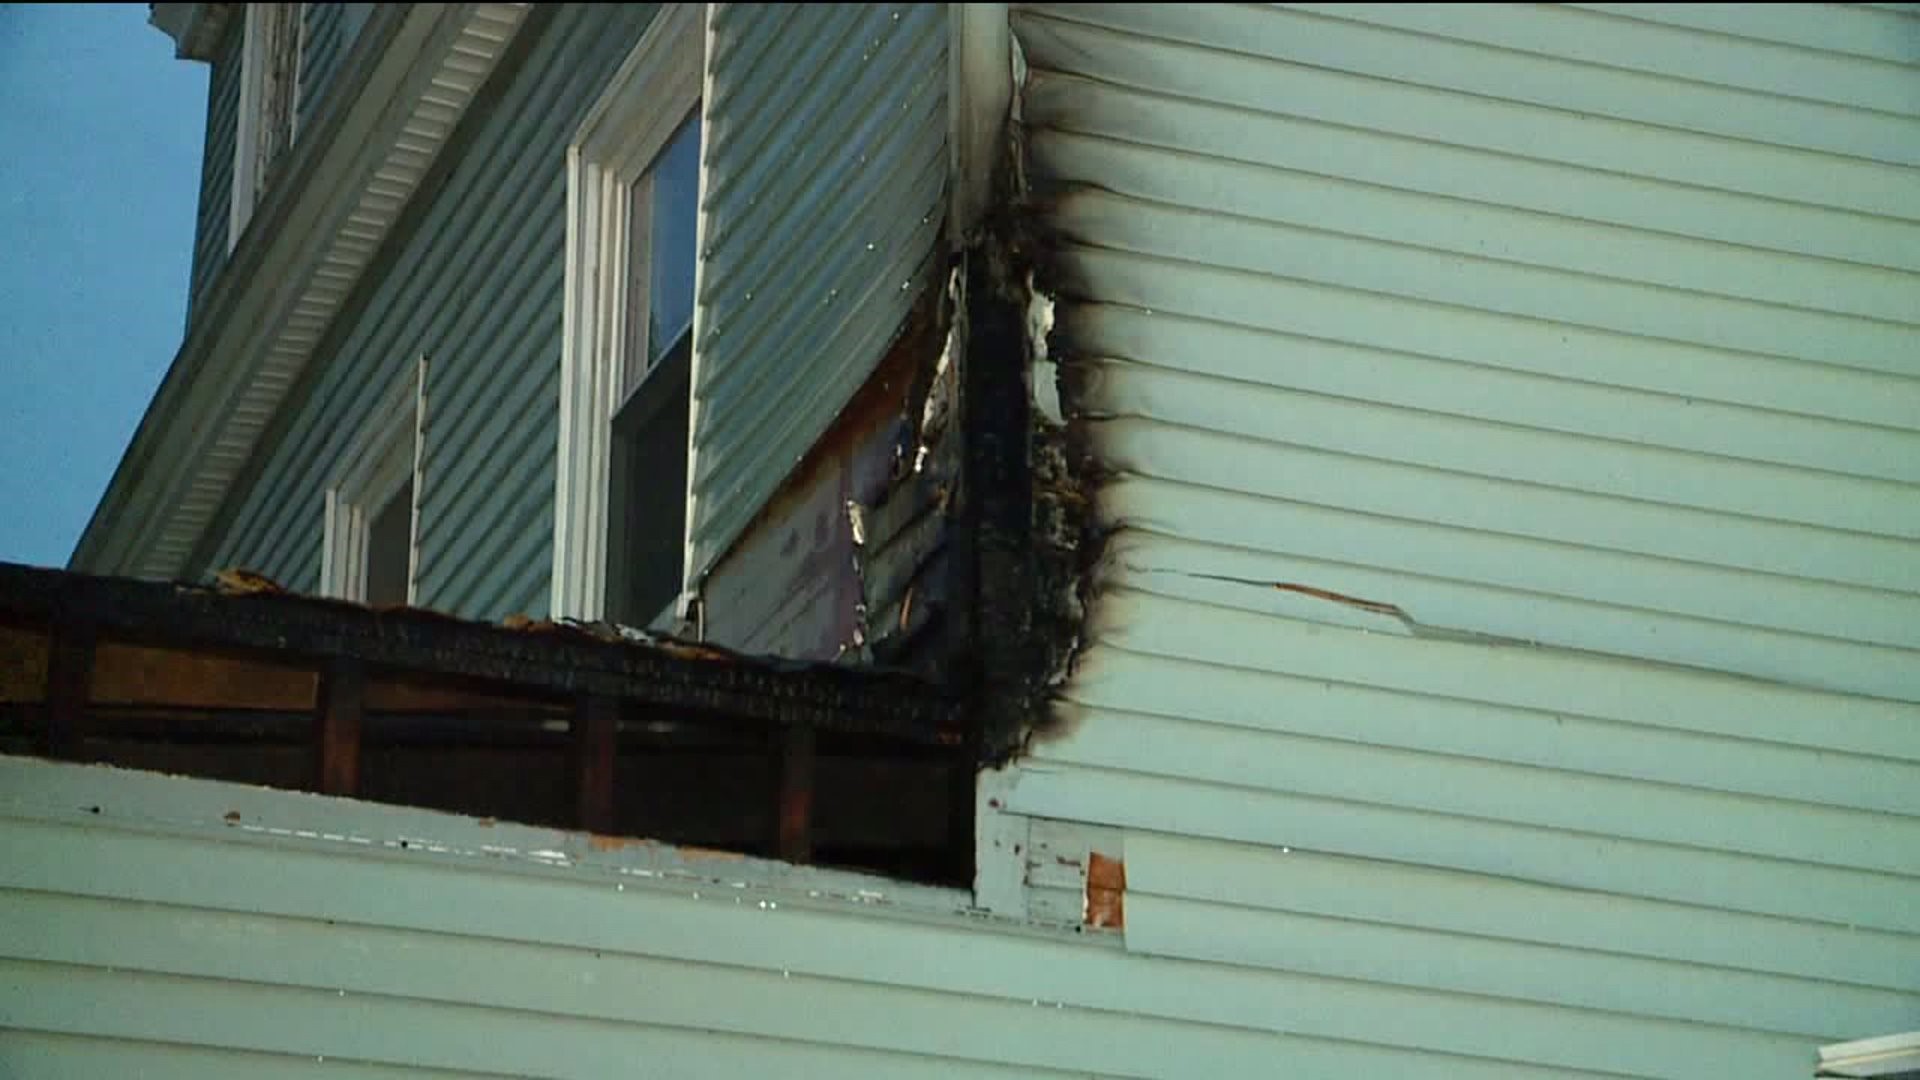 Vacant Home in Scranton Damaged by Flames